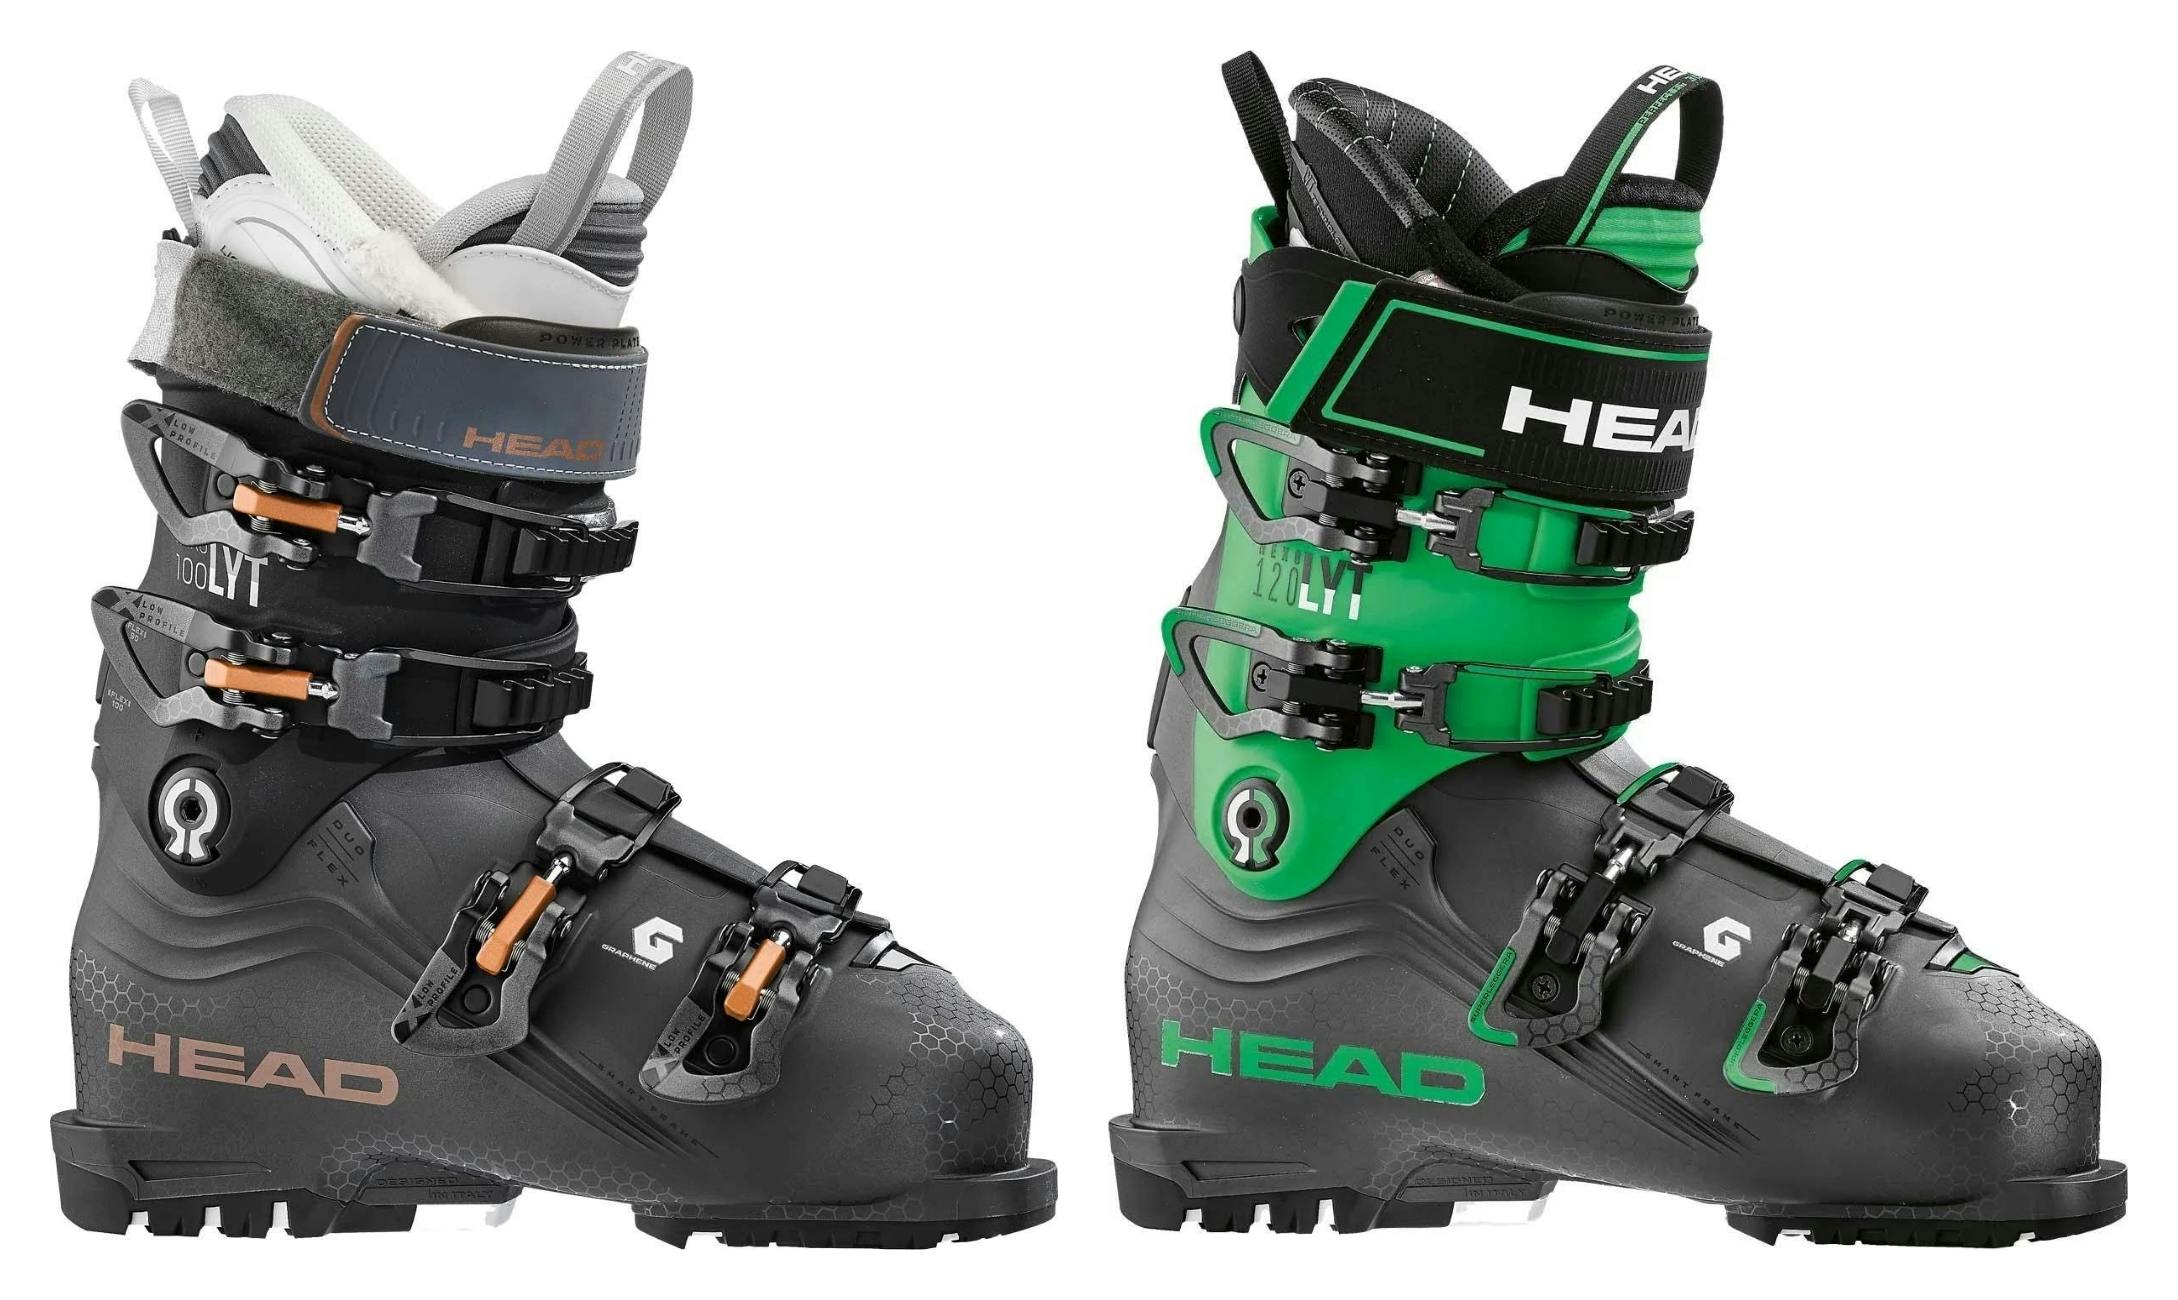 Two black ski boots with HEAD logos